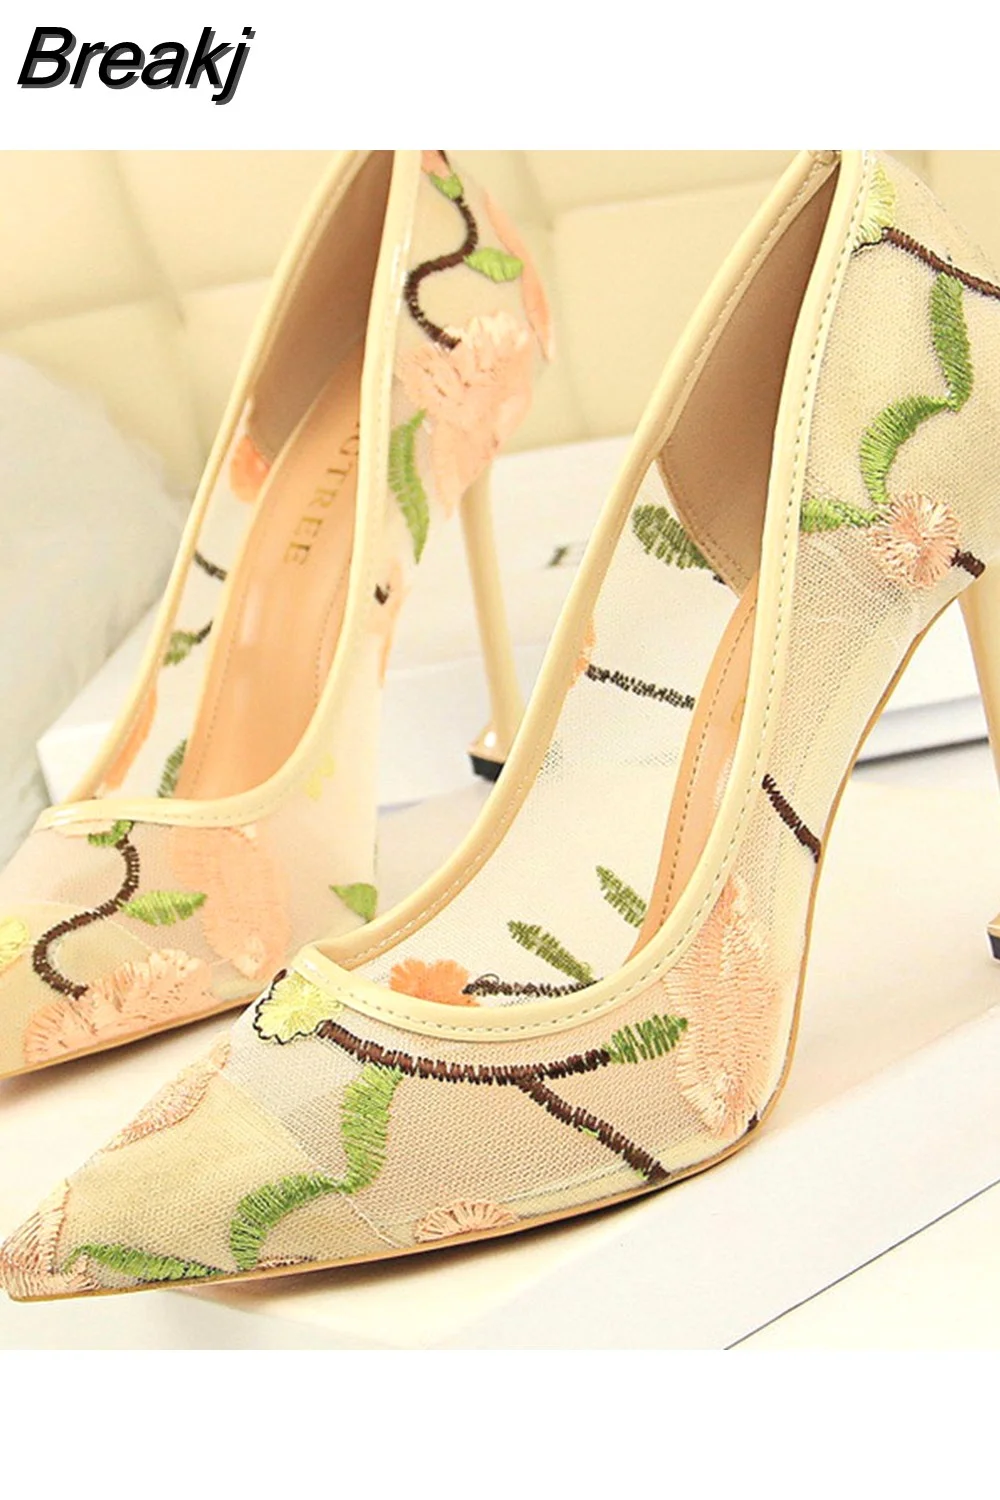 Breakj Flower Embroidery Lace High Heels Sexy Party Summer Woman Shoes 2023 New Stiletto Fashion Women Heel Mesh Women's Pumps